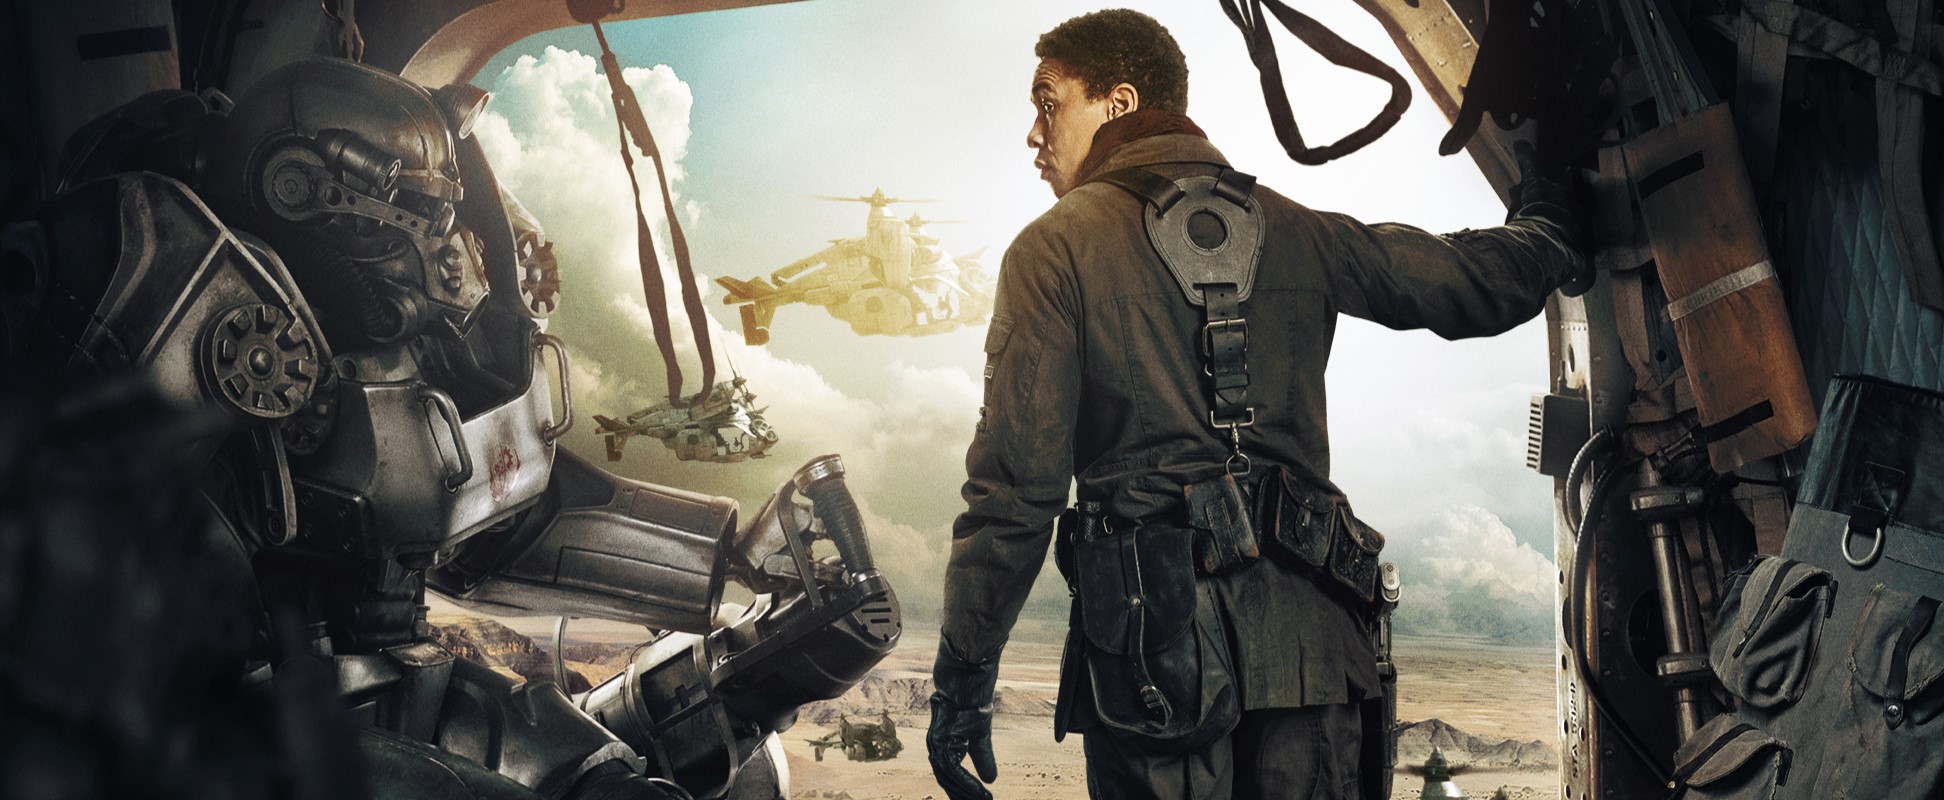 Cropped promotional image of Aaron Moten as Maximus in 'Fallout.' Maximus is a young Black man with short hair wearing a Brotherhood of Steel uniform and standing in the open side of a flying vertibird. He is looking over his shoulder at someone in power armor who's sitting in the cabin with him. 